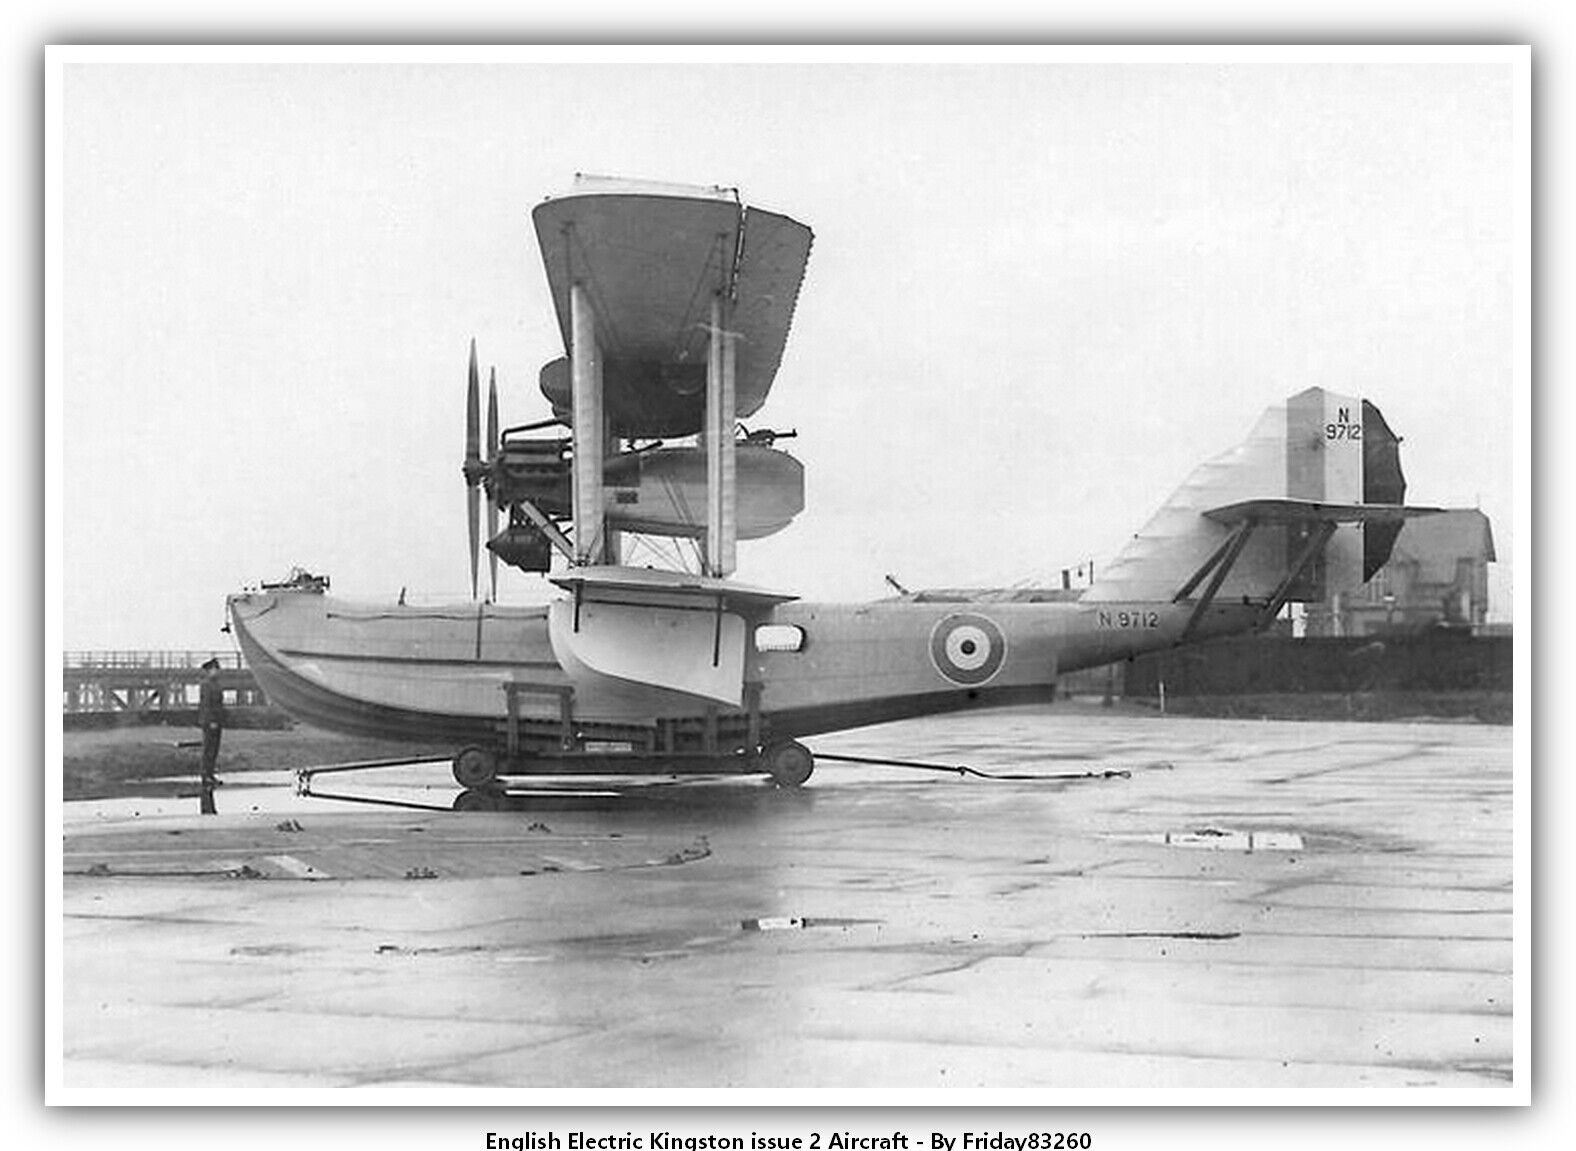 English Electric Kingston issue 2 Aircraft